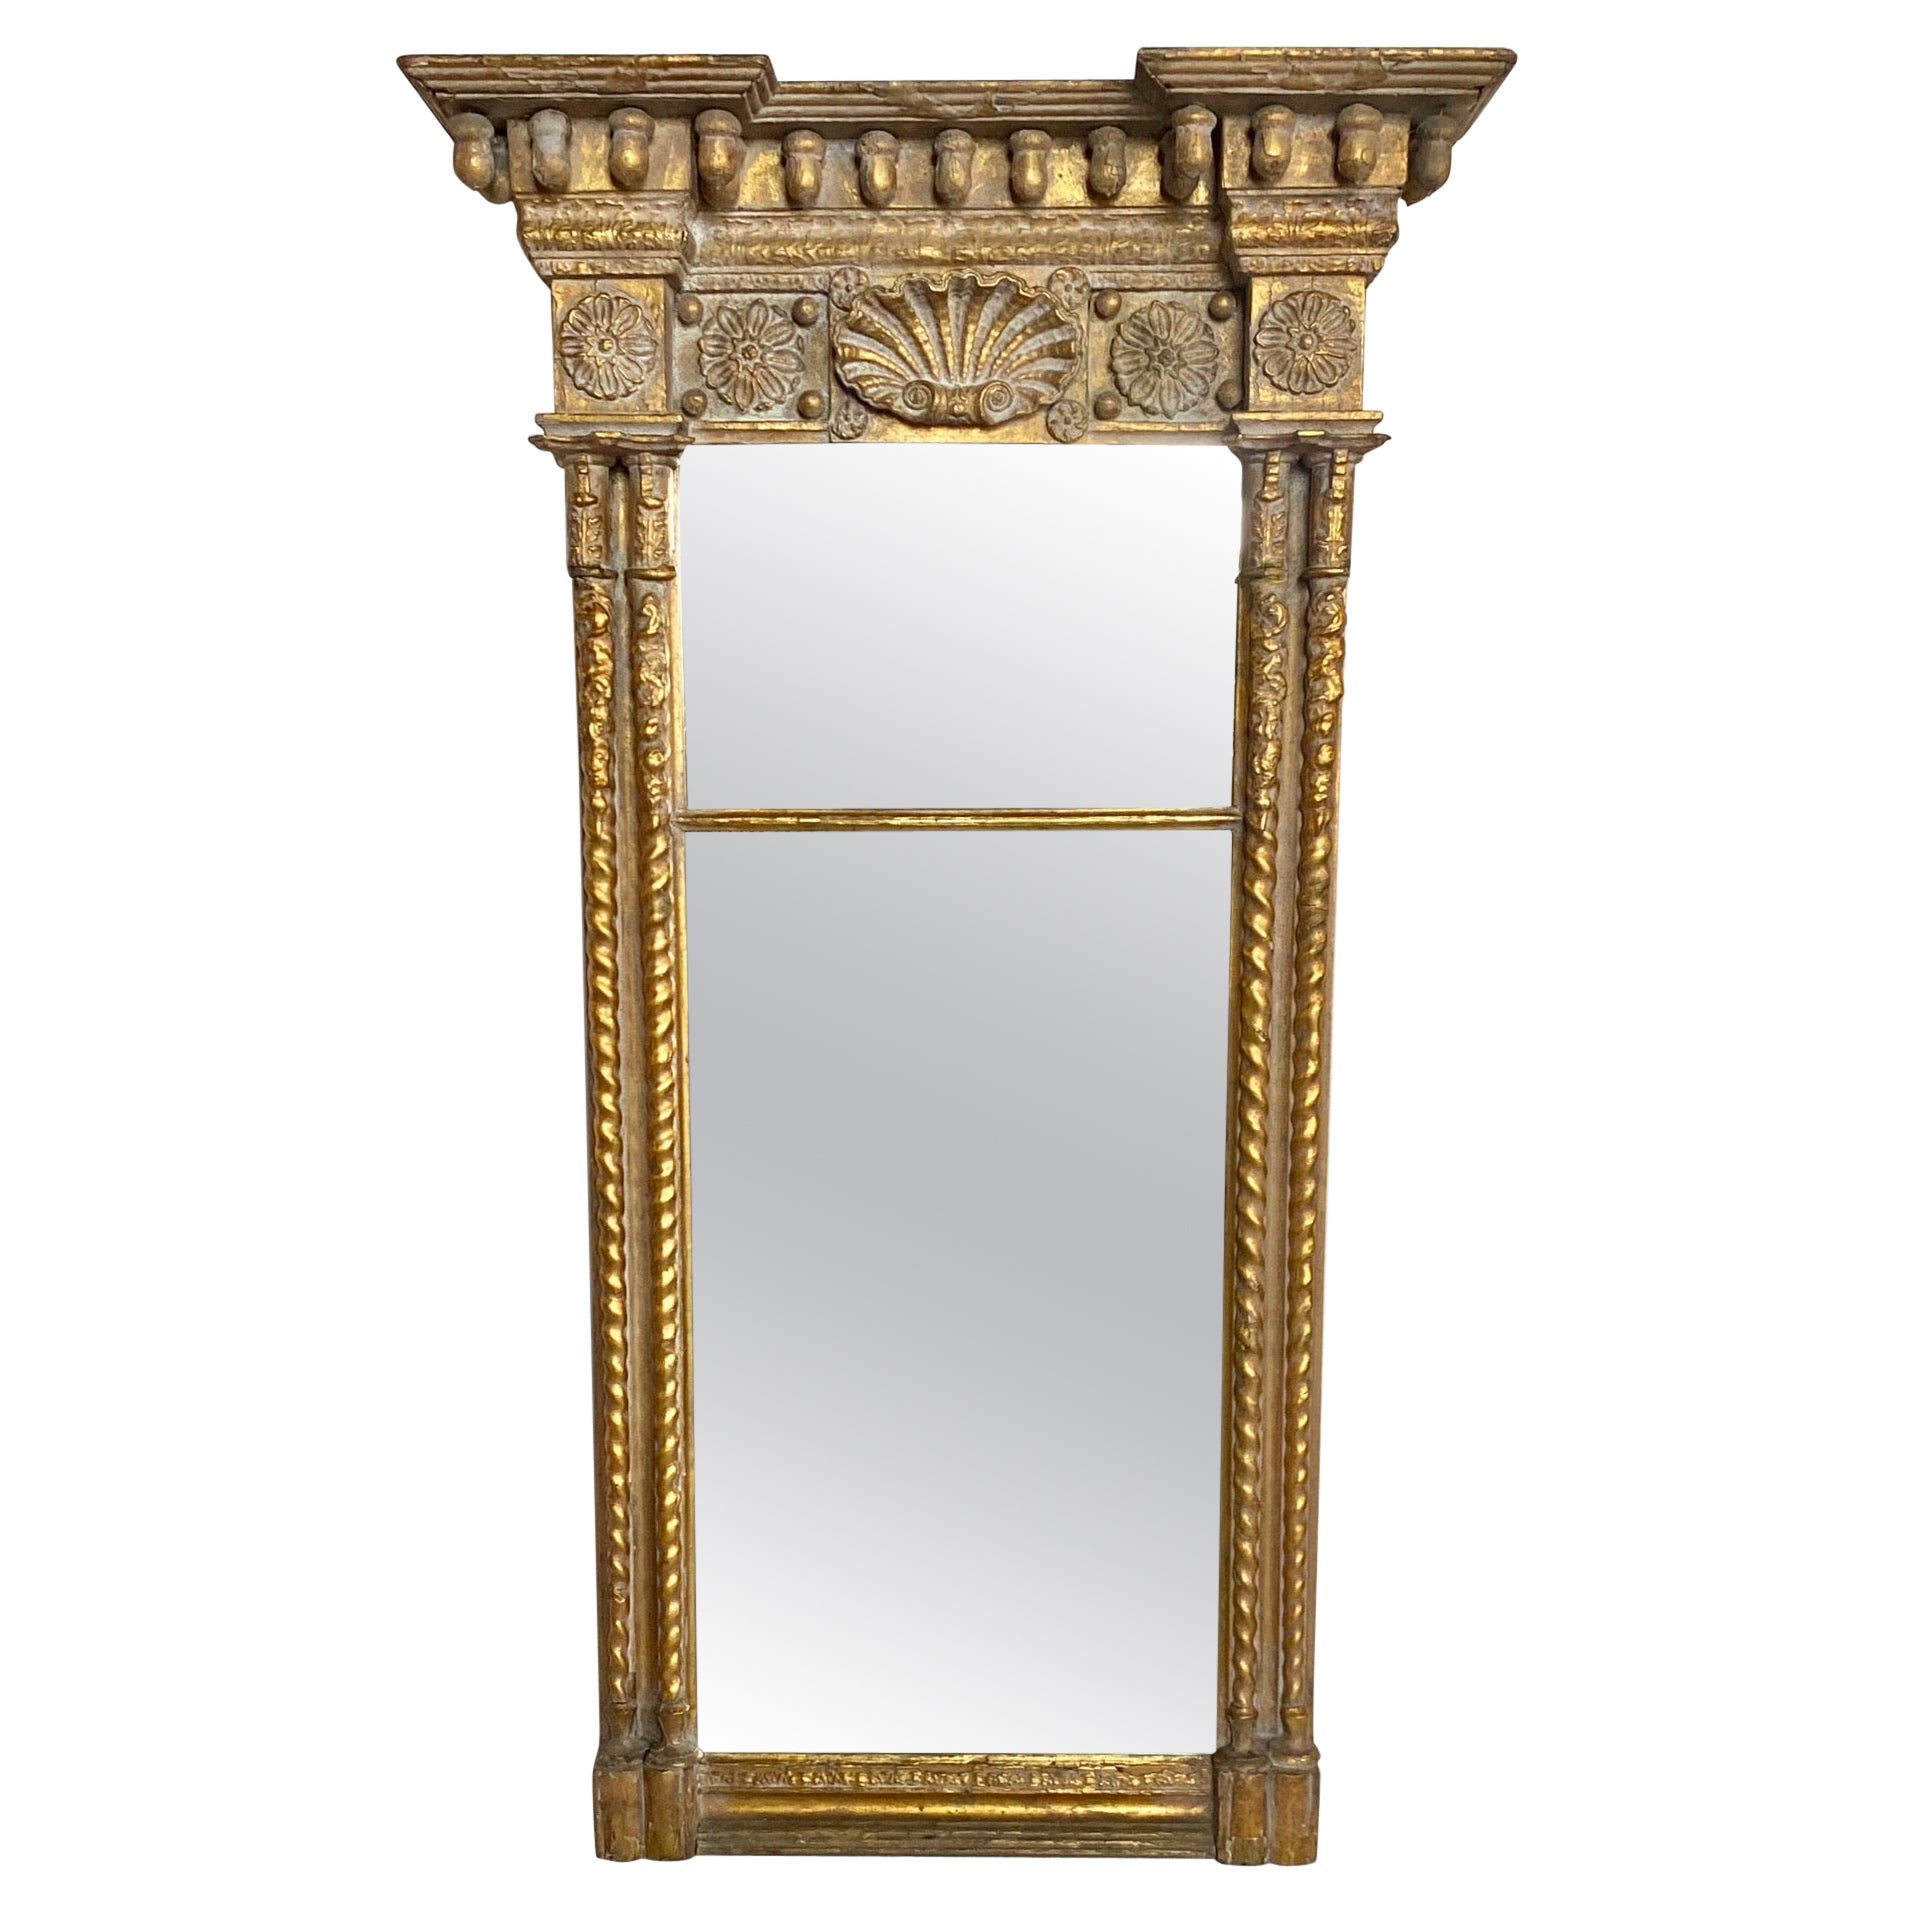 American Classical Gilt Pier Mirror with Acorn, Shell, and Medallion Carvings 